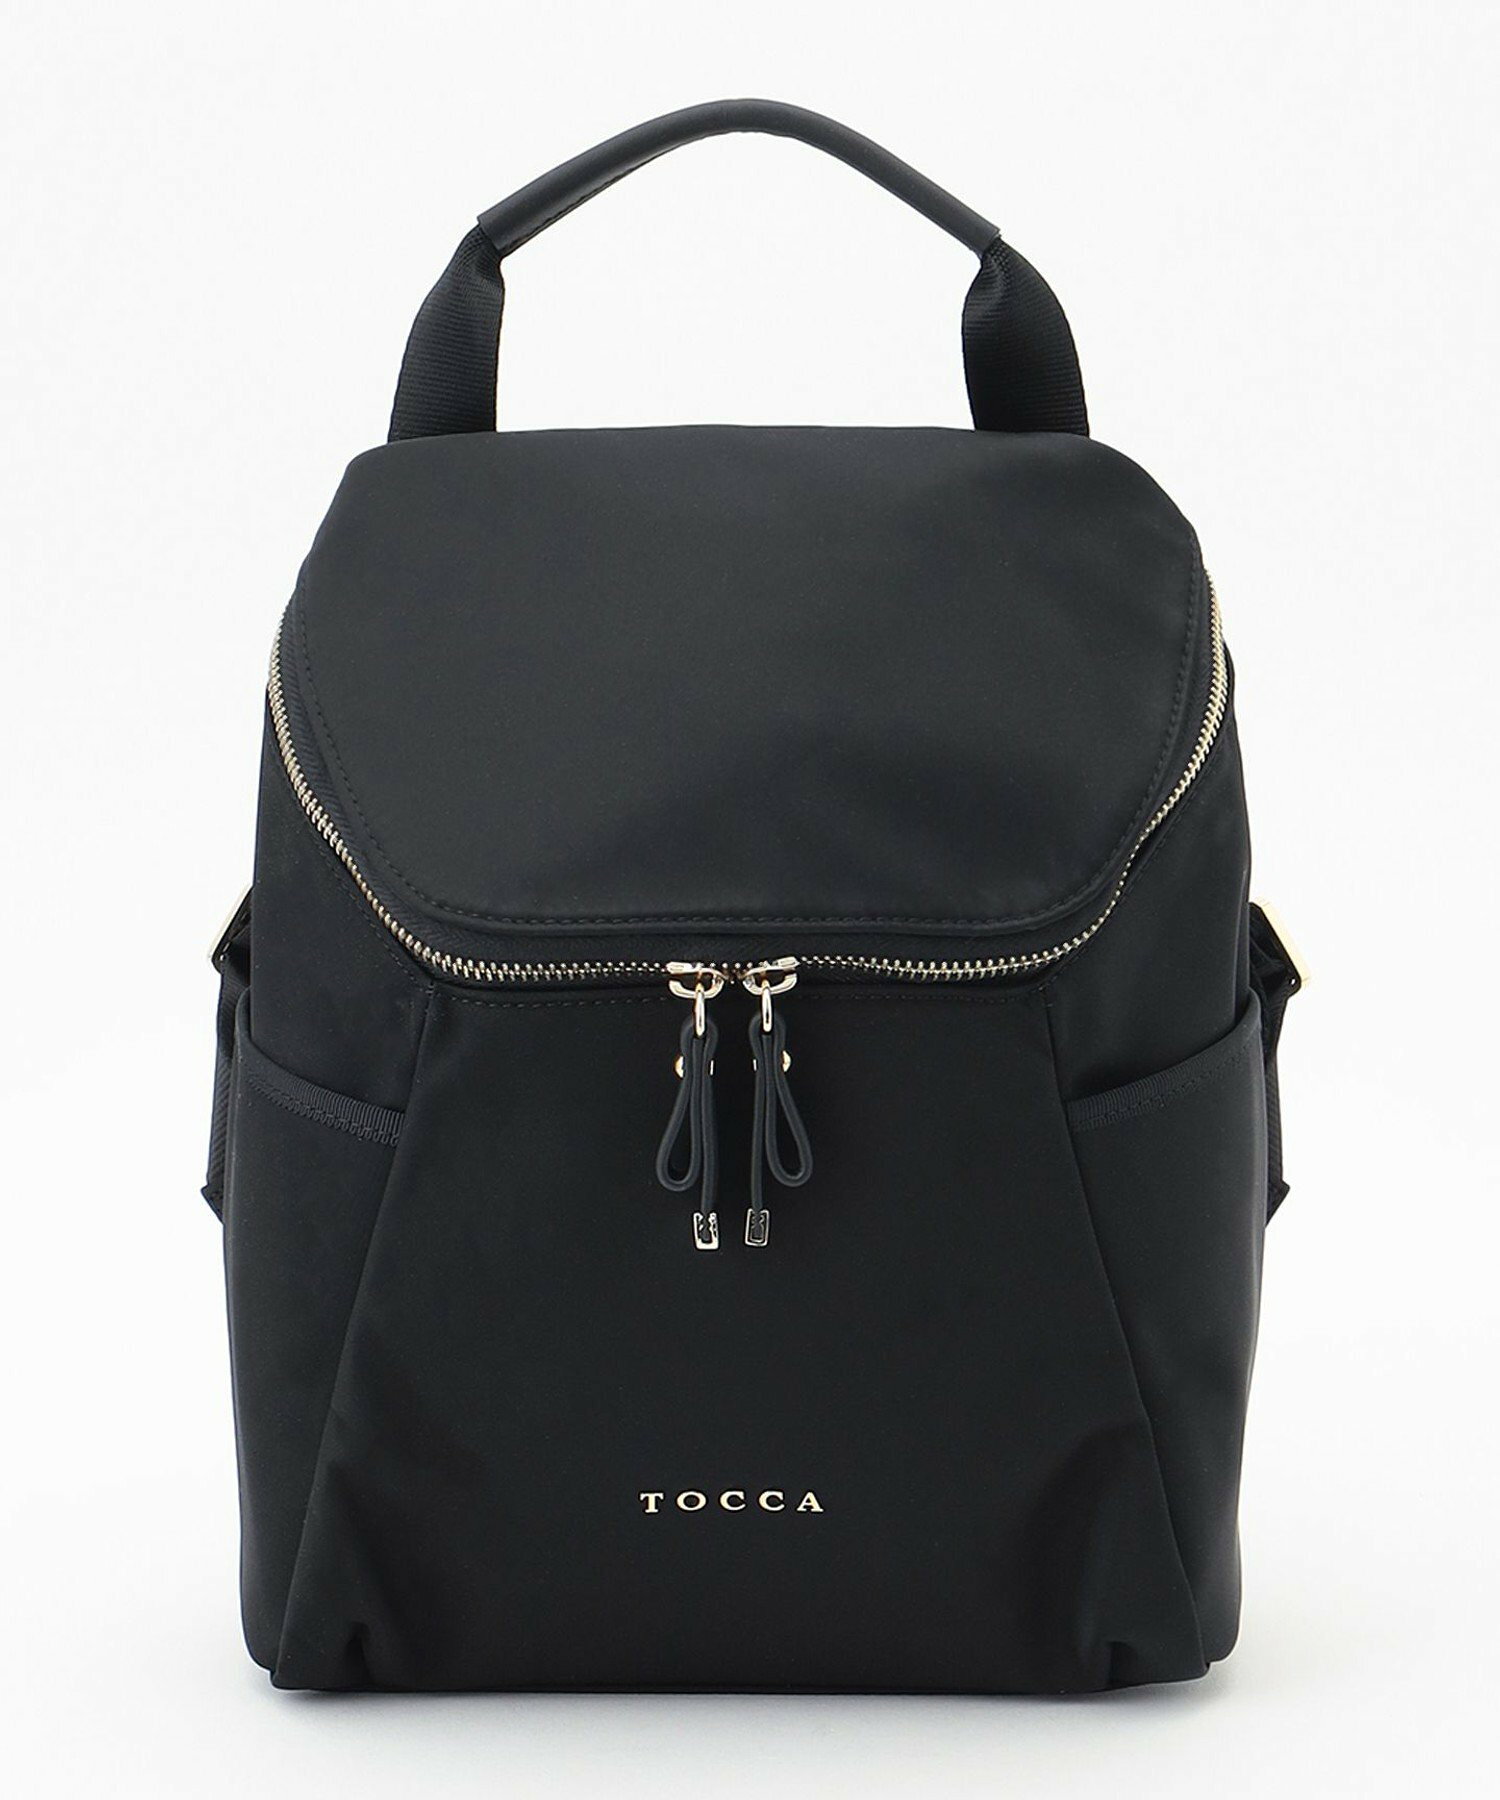 TETRA BACKPACK M リュックサック M